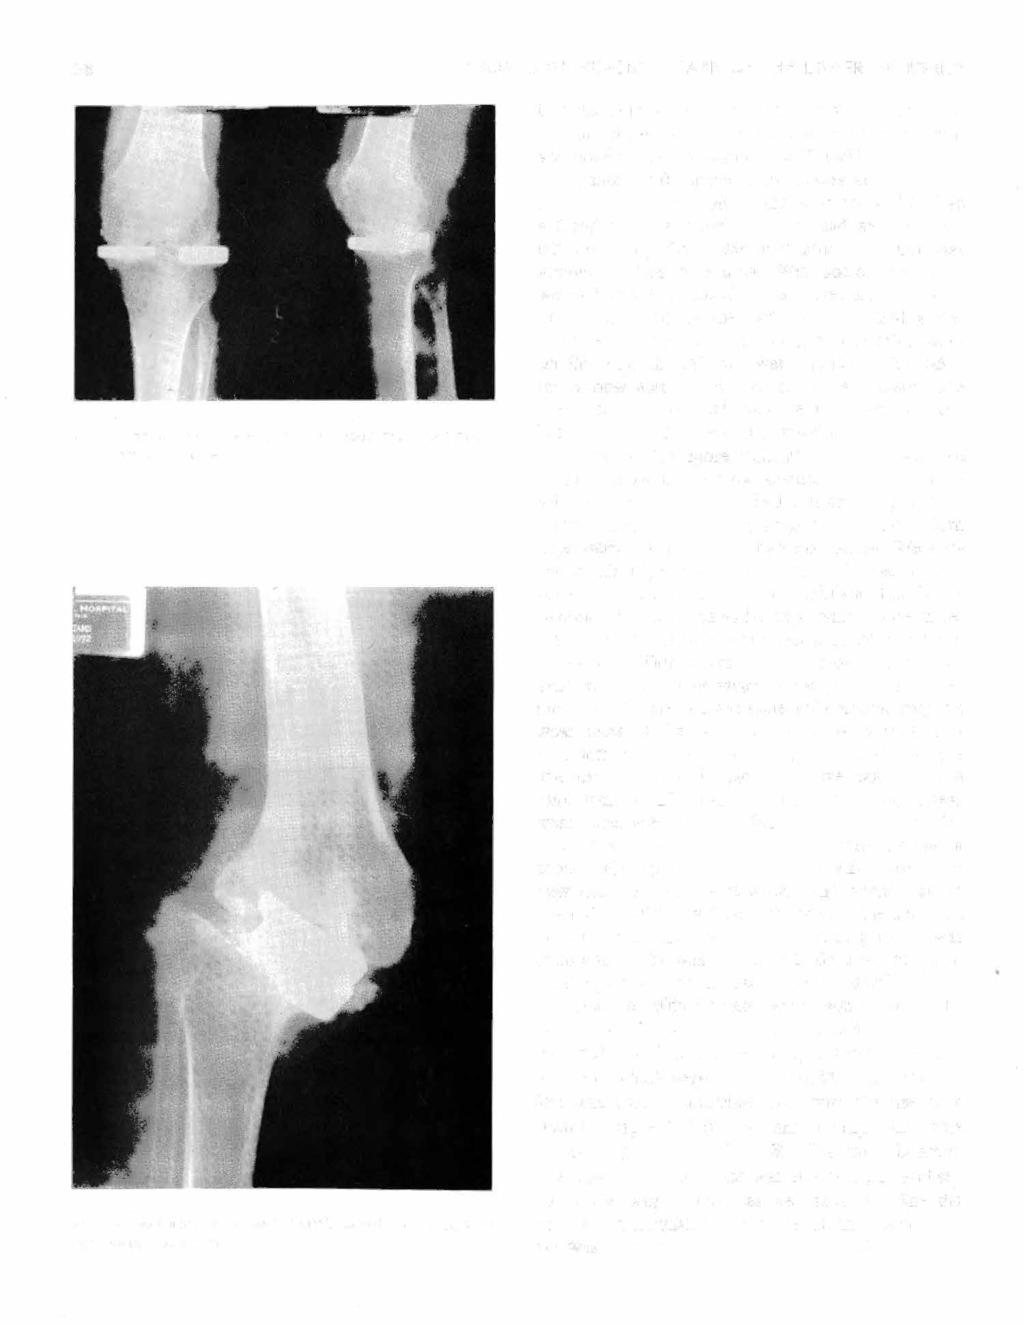 28 THOMPSON: SURGICAL CARE OF THE LOWER EXTREMITY Fig. 8-Mclntosh plateau prosthesis four years postoperatively with good results. Fig. 9-Mclntosh prosthesis which failed in rheumatoid two years postsurgery.